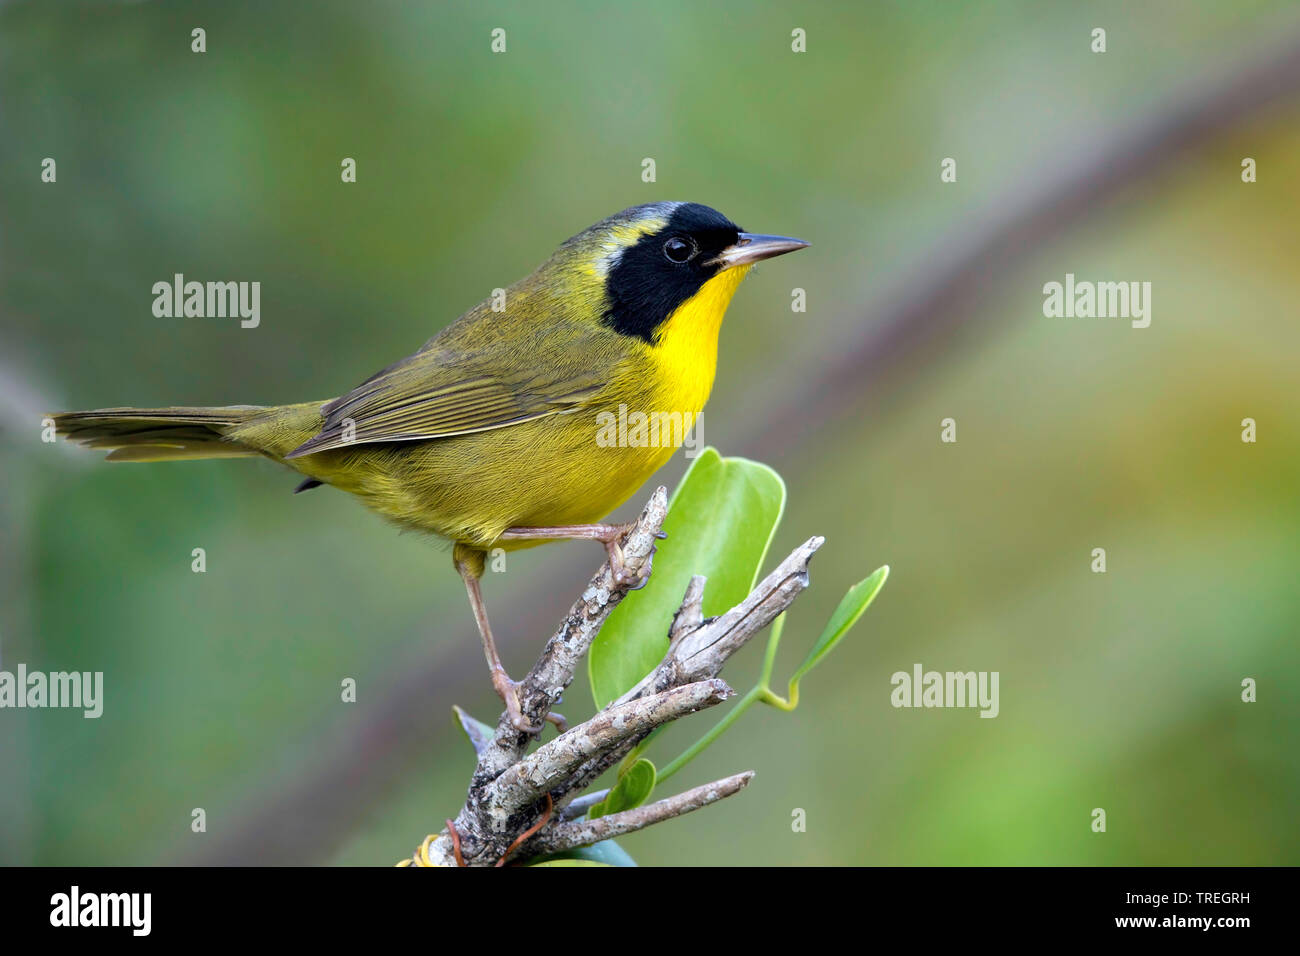 bahama yellowthroat (Geothlypis rostrata), is a resident breeder and endemic to the Bahamas., The Bahamas Stock Photo